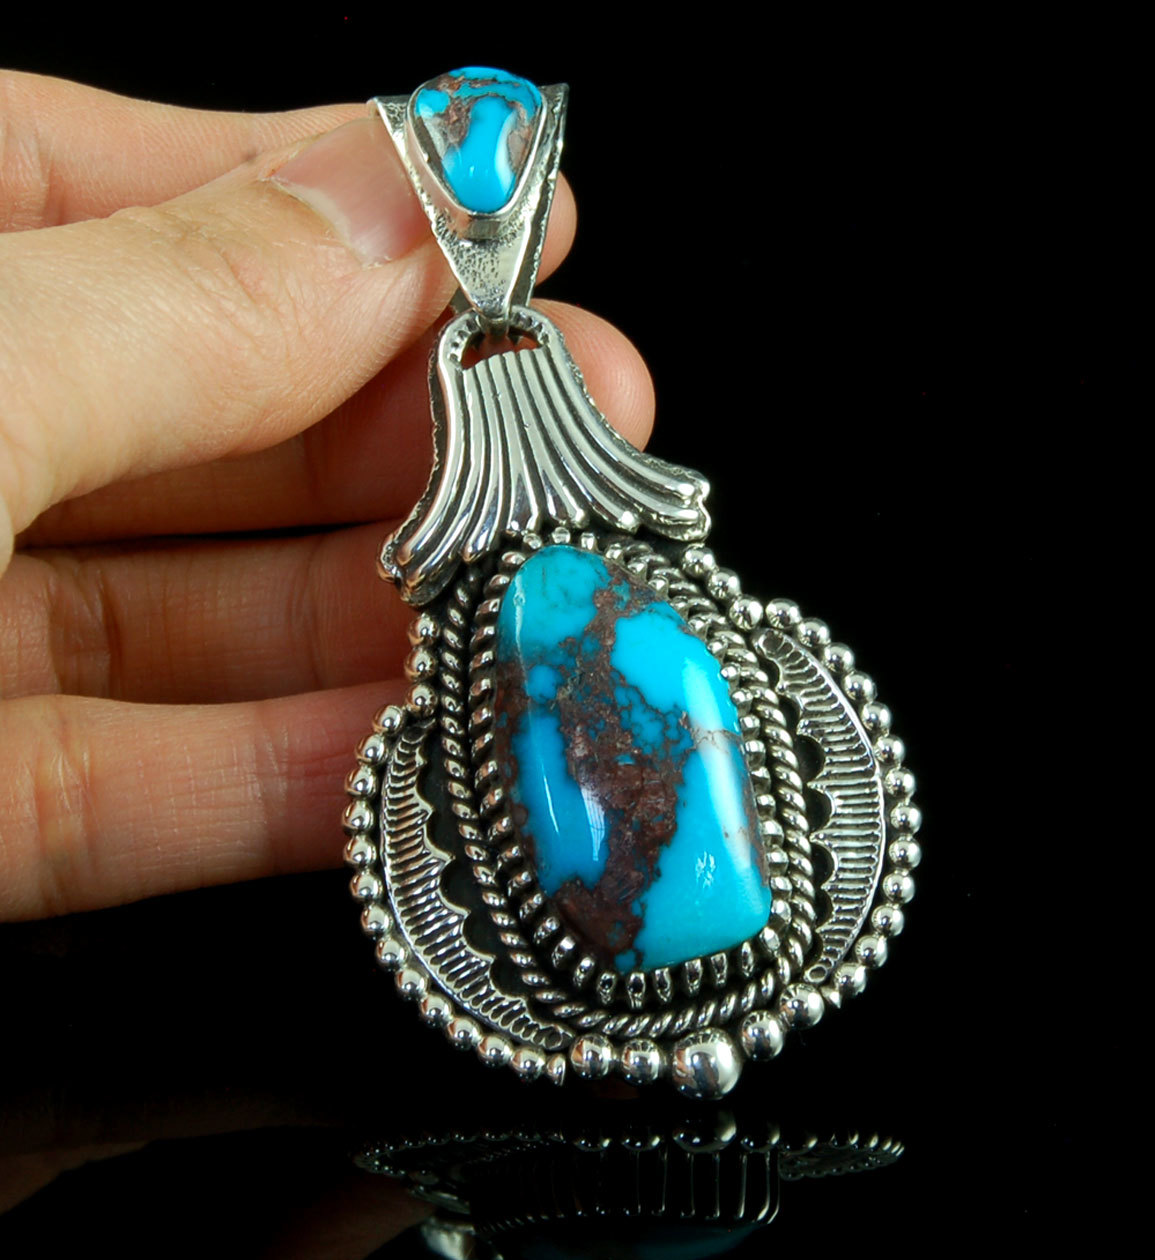 Handmade Sterling Silver pendant by John Hartman with high grade natural Bisbee Turquoise from Arizona.